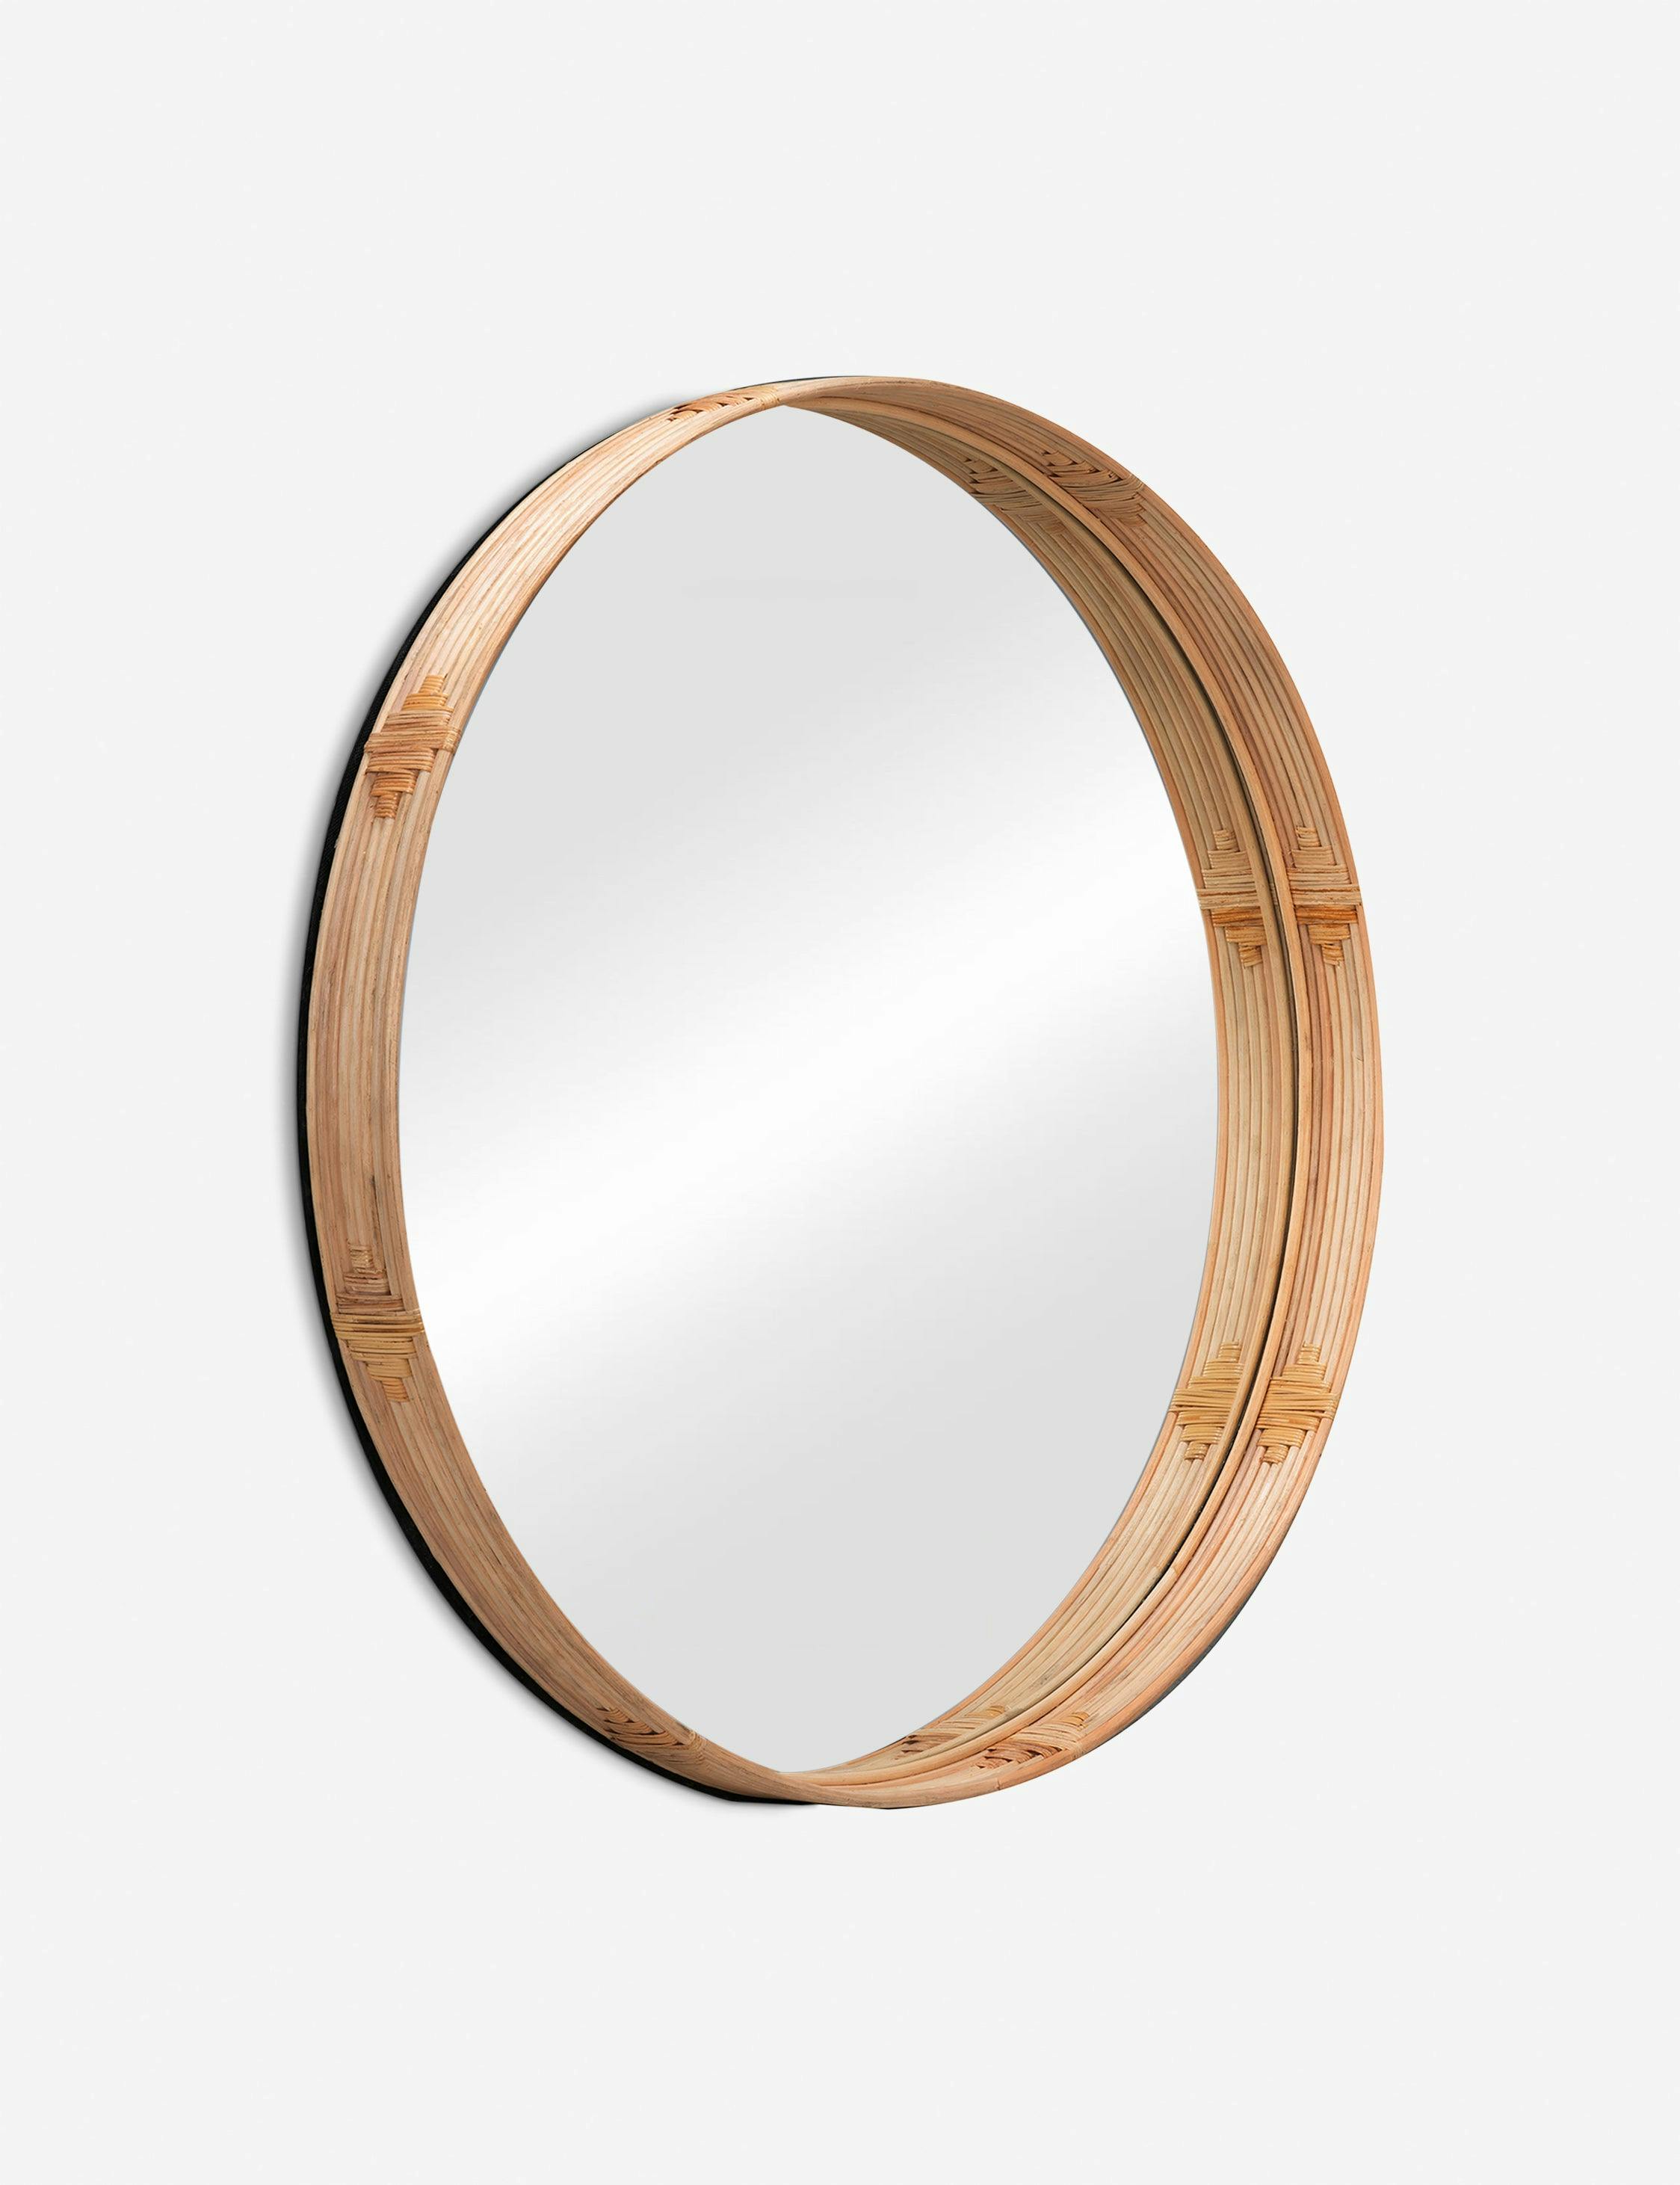 Adaline 35" Natural Round Wood and Rattan Wall Mirror